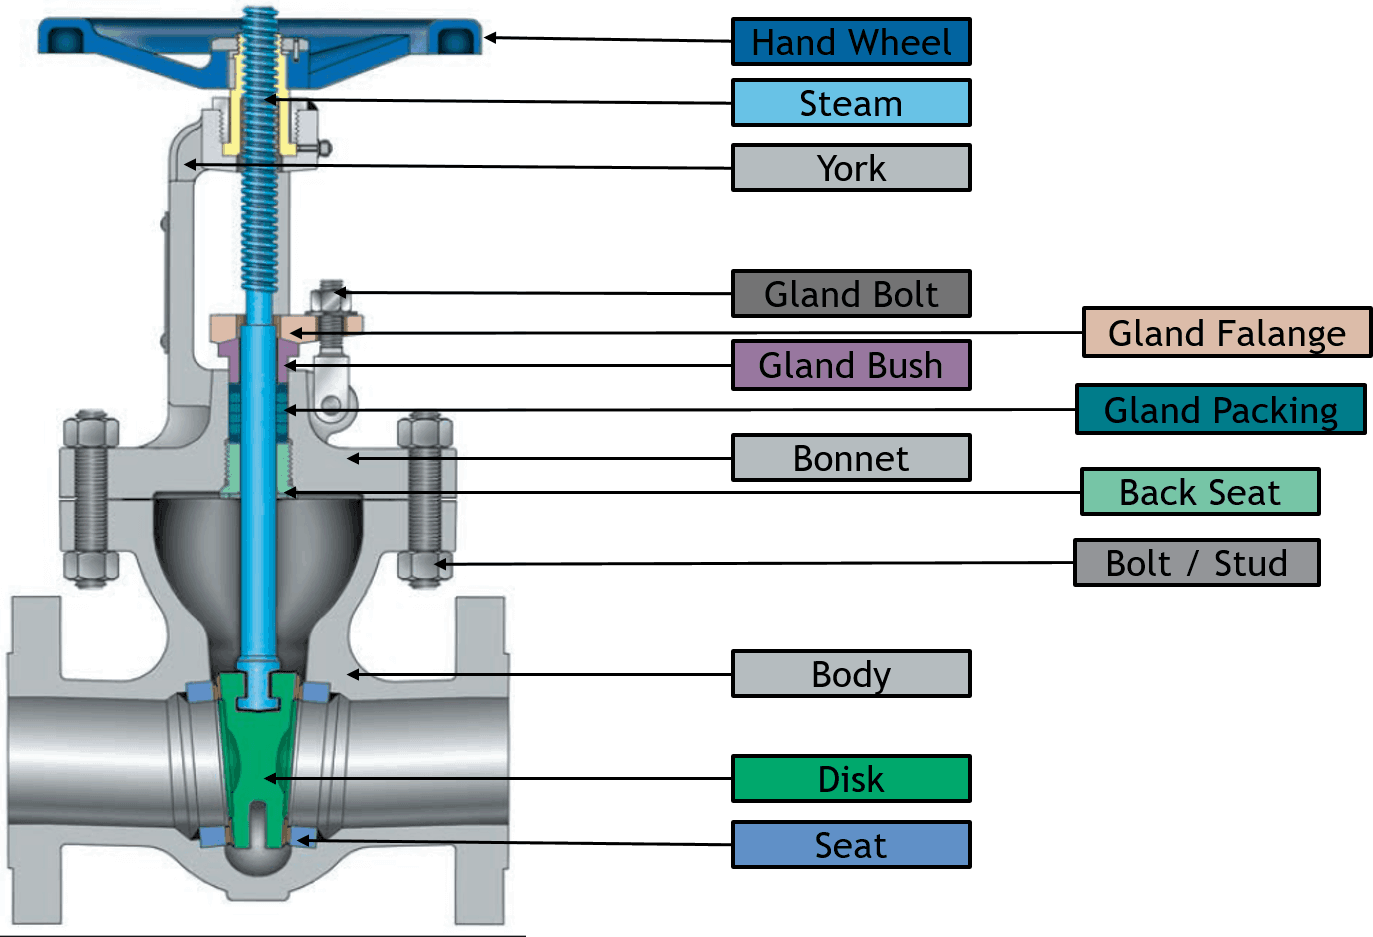 travel of the valve